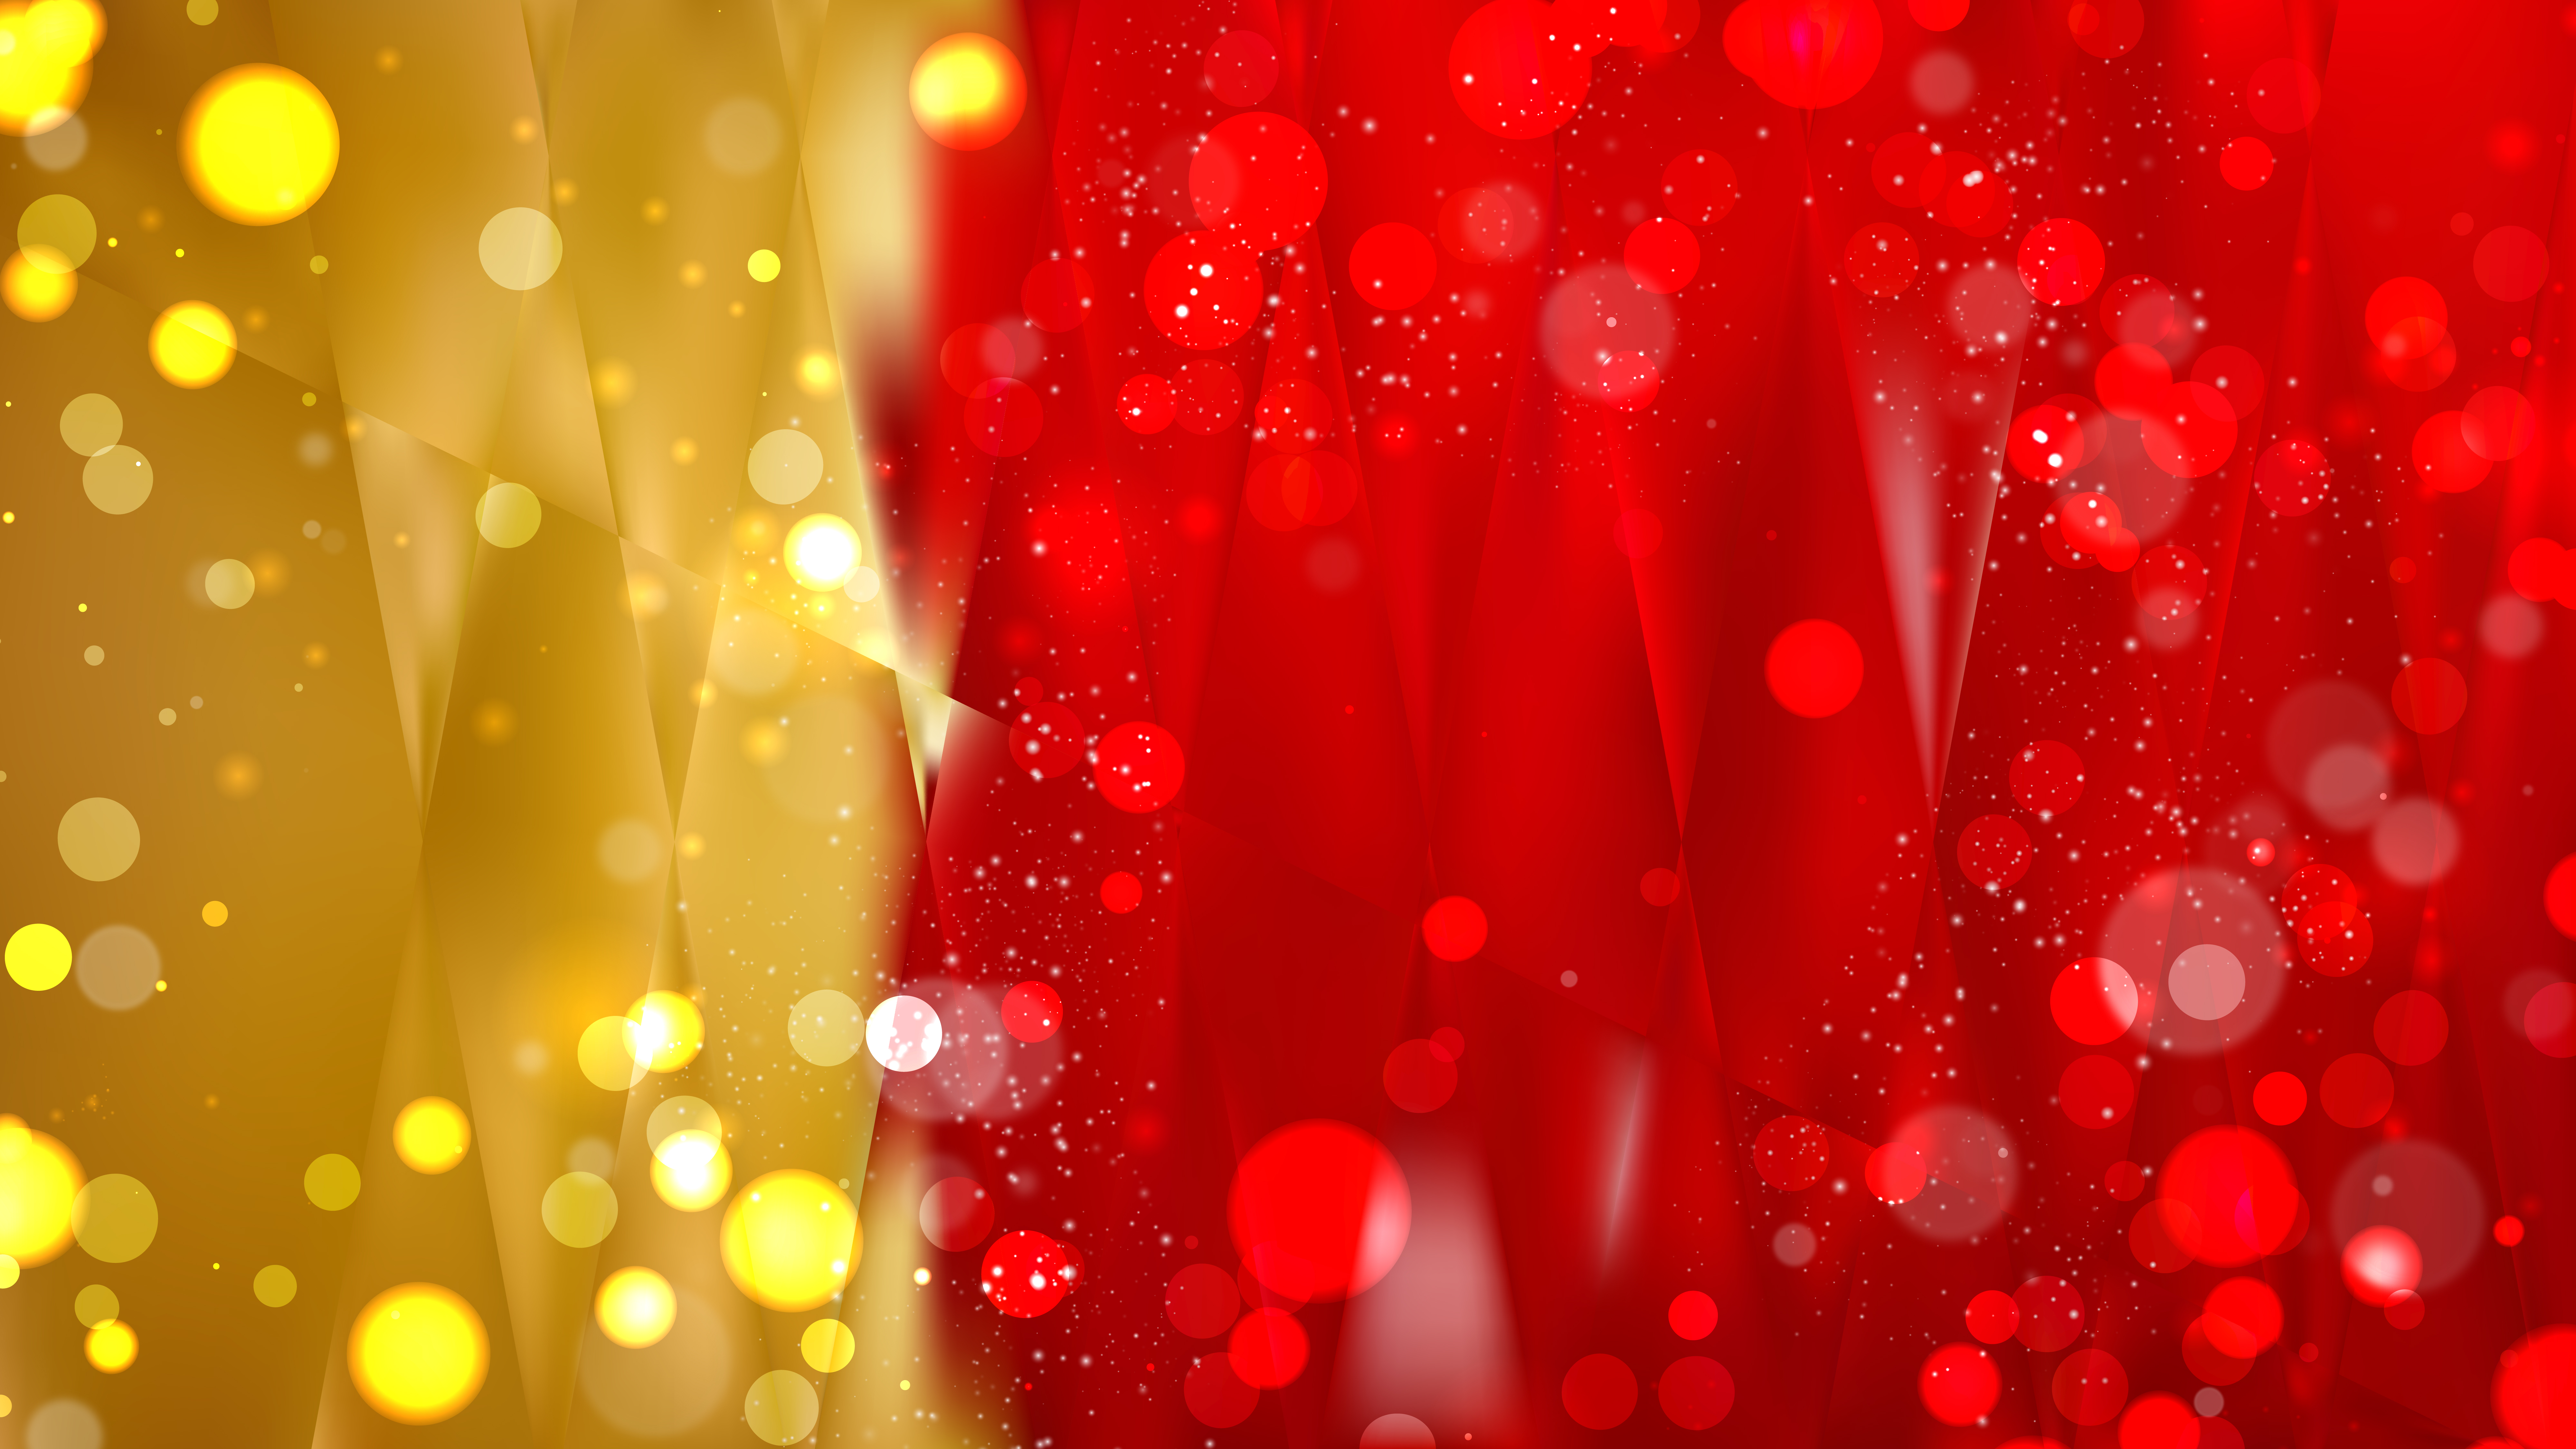 Abstract Red And Gold Defocused Background Image